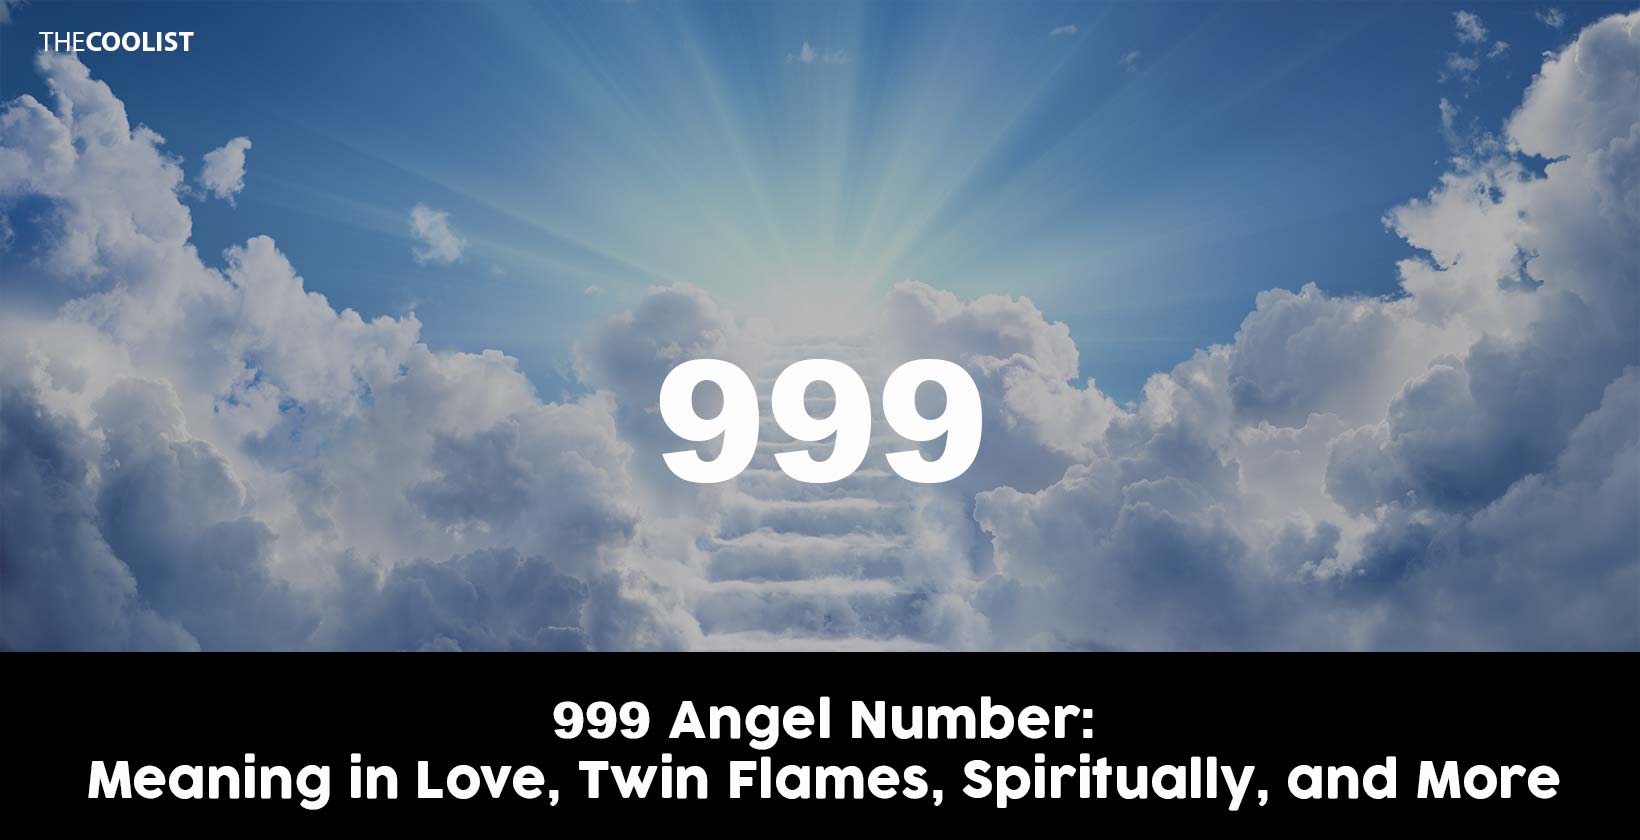 999 Angel Number: What It Means for Love, Twin Flames, and Spiritually